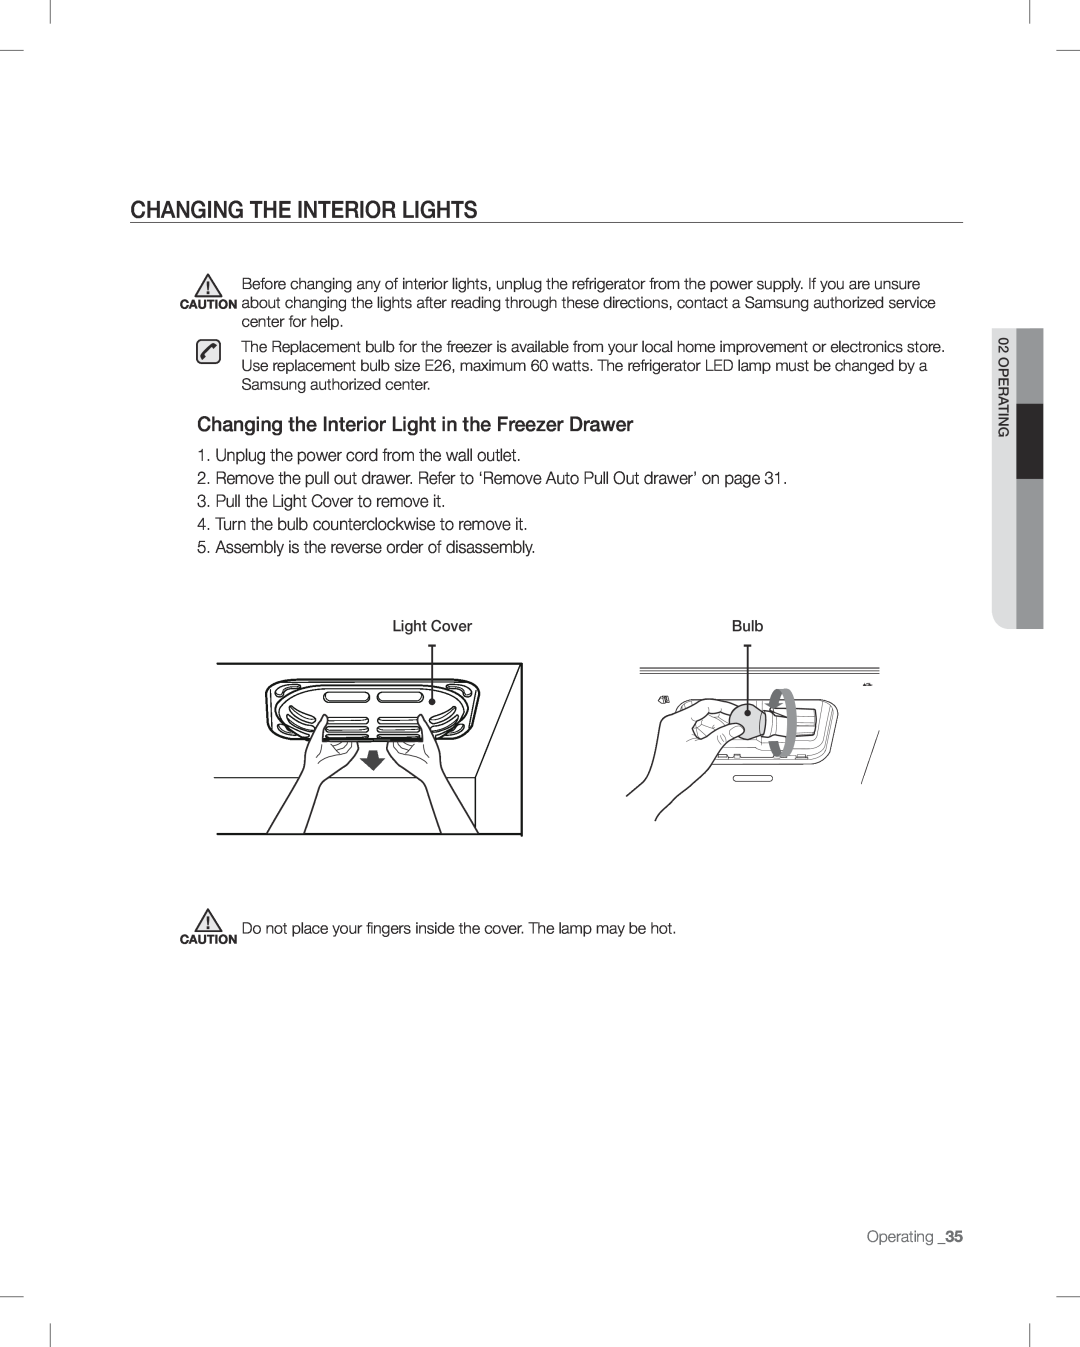 Samsung RF268AB user manual Changing The Interior Lights, Changing the Interior Light in the Freezer Drawer, Operating _35 